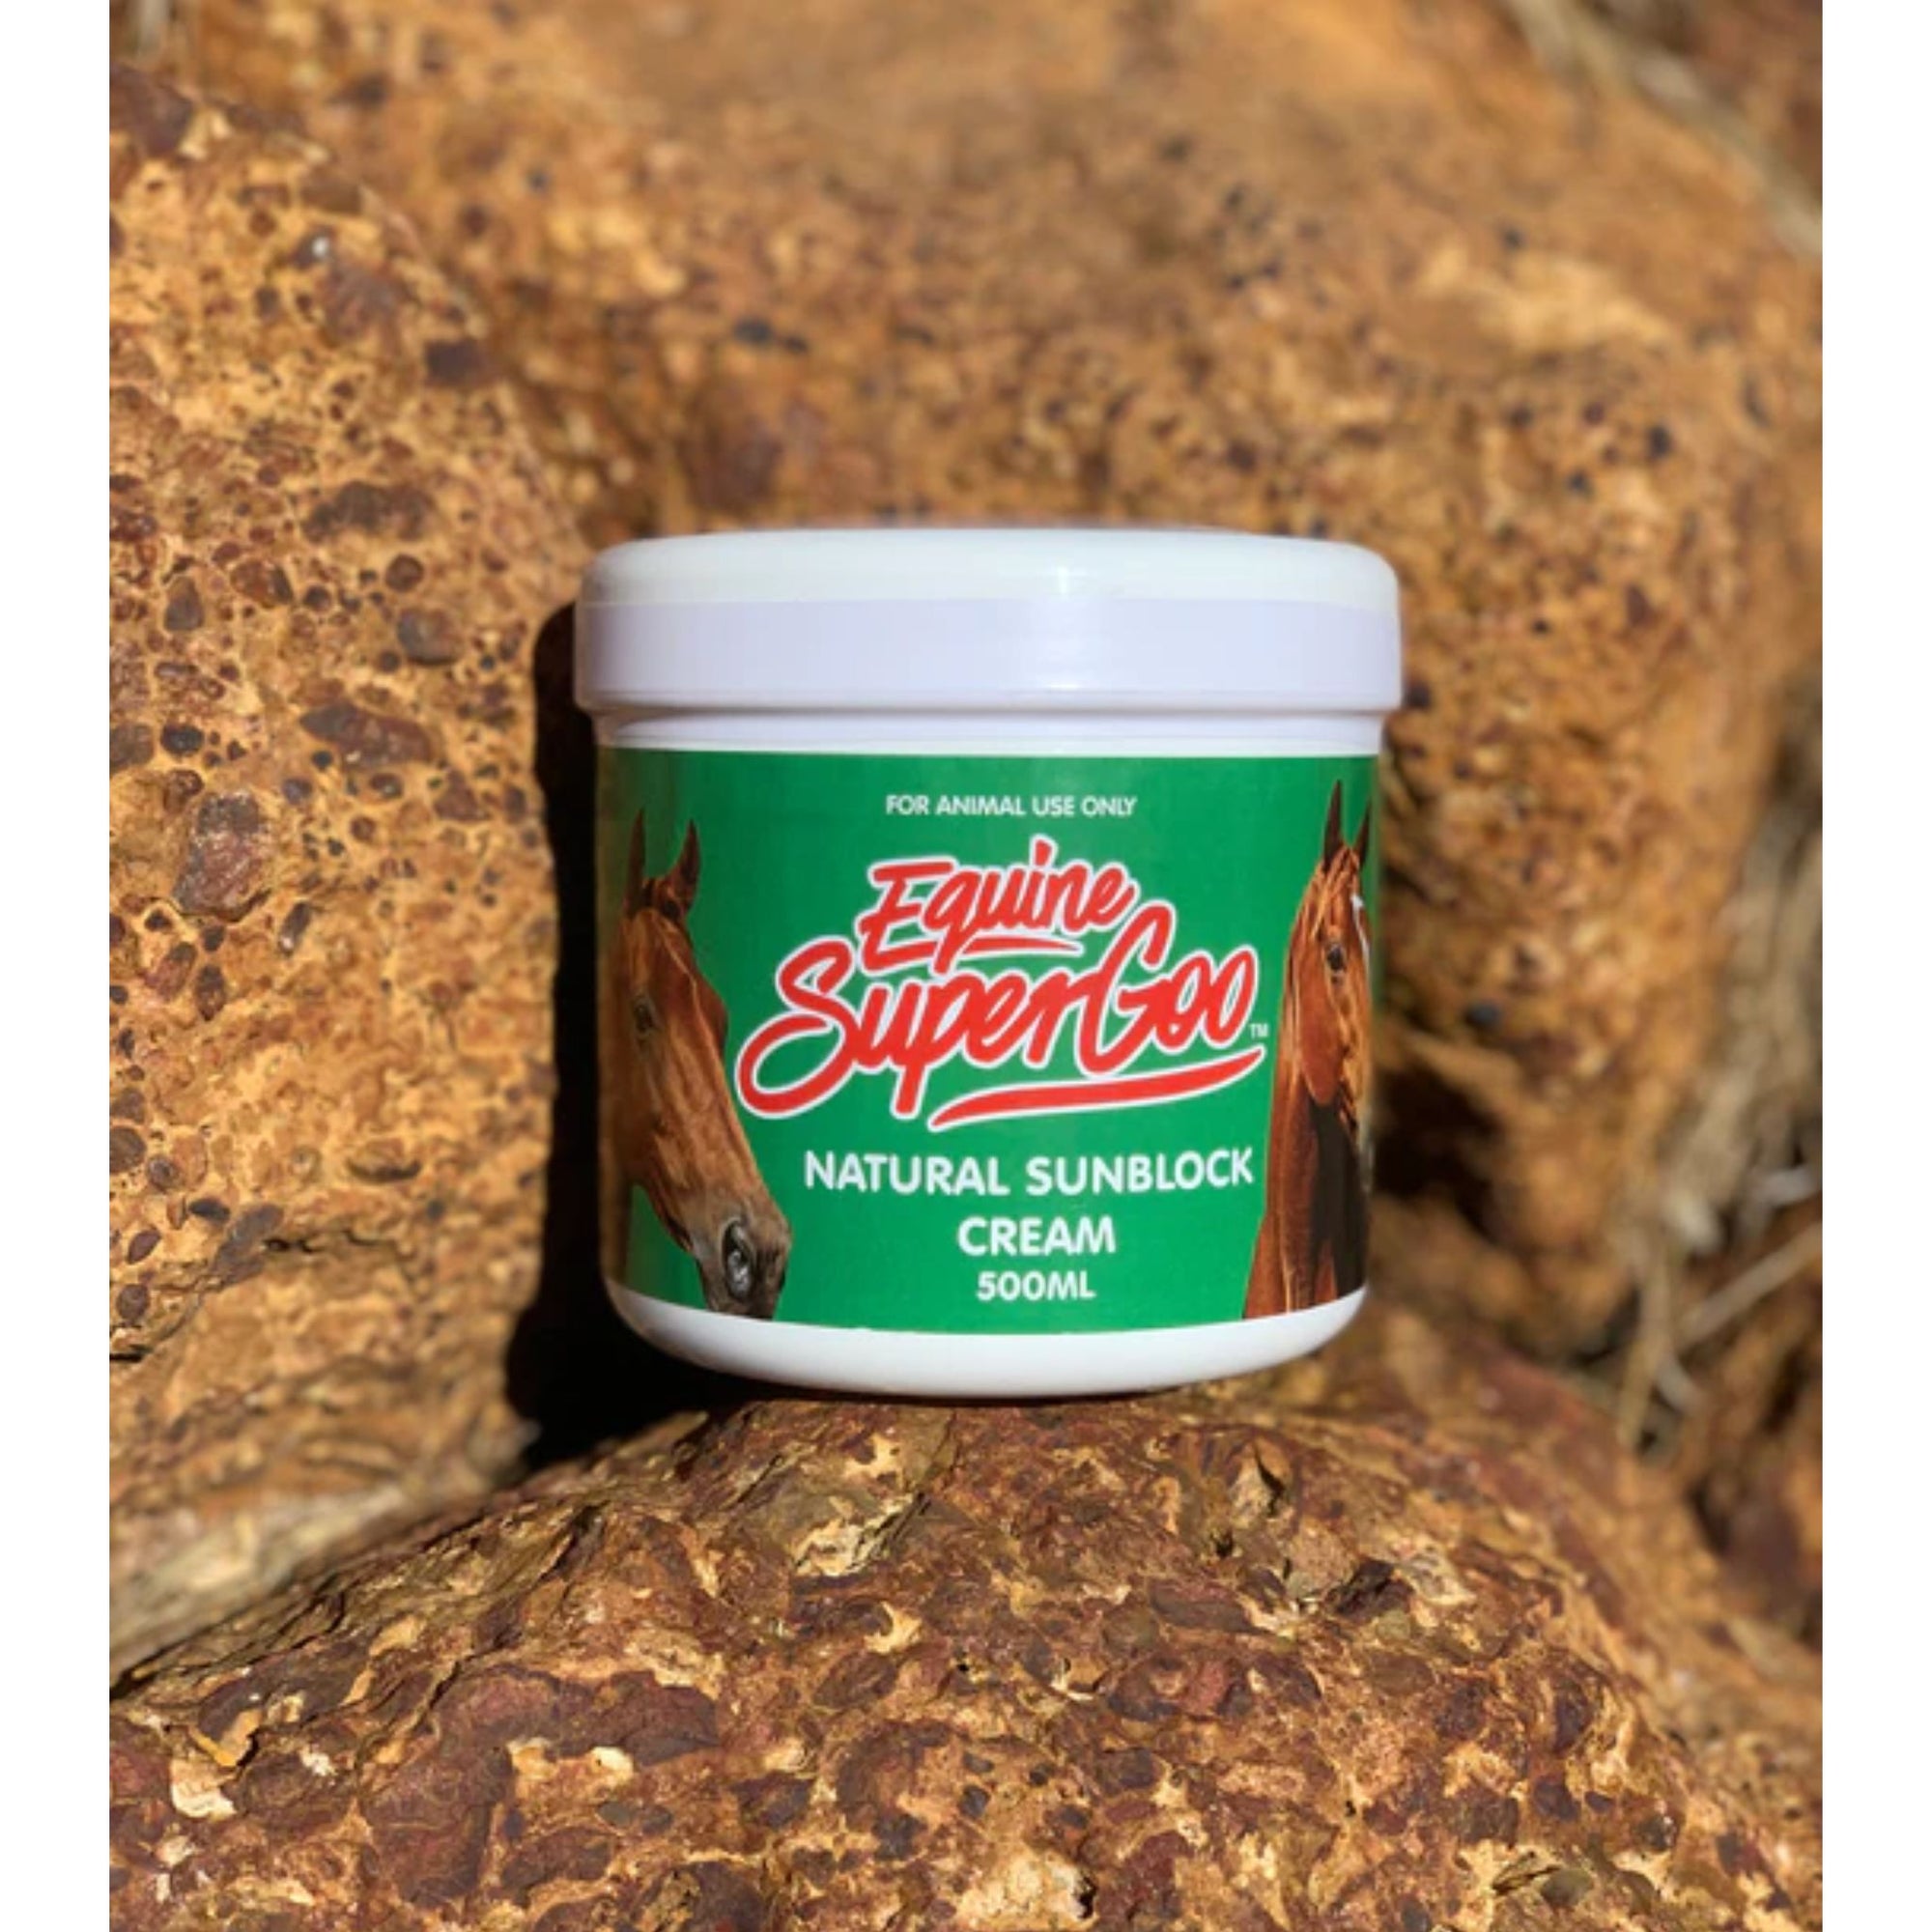 Tub of "SuperGoo" sunblock with green label, nestled in rocks.